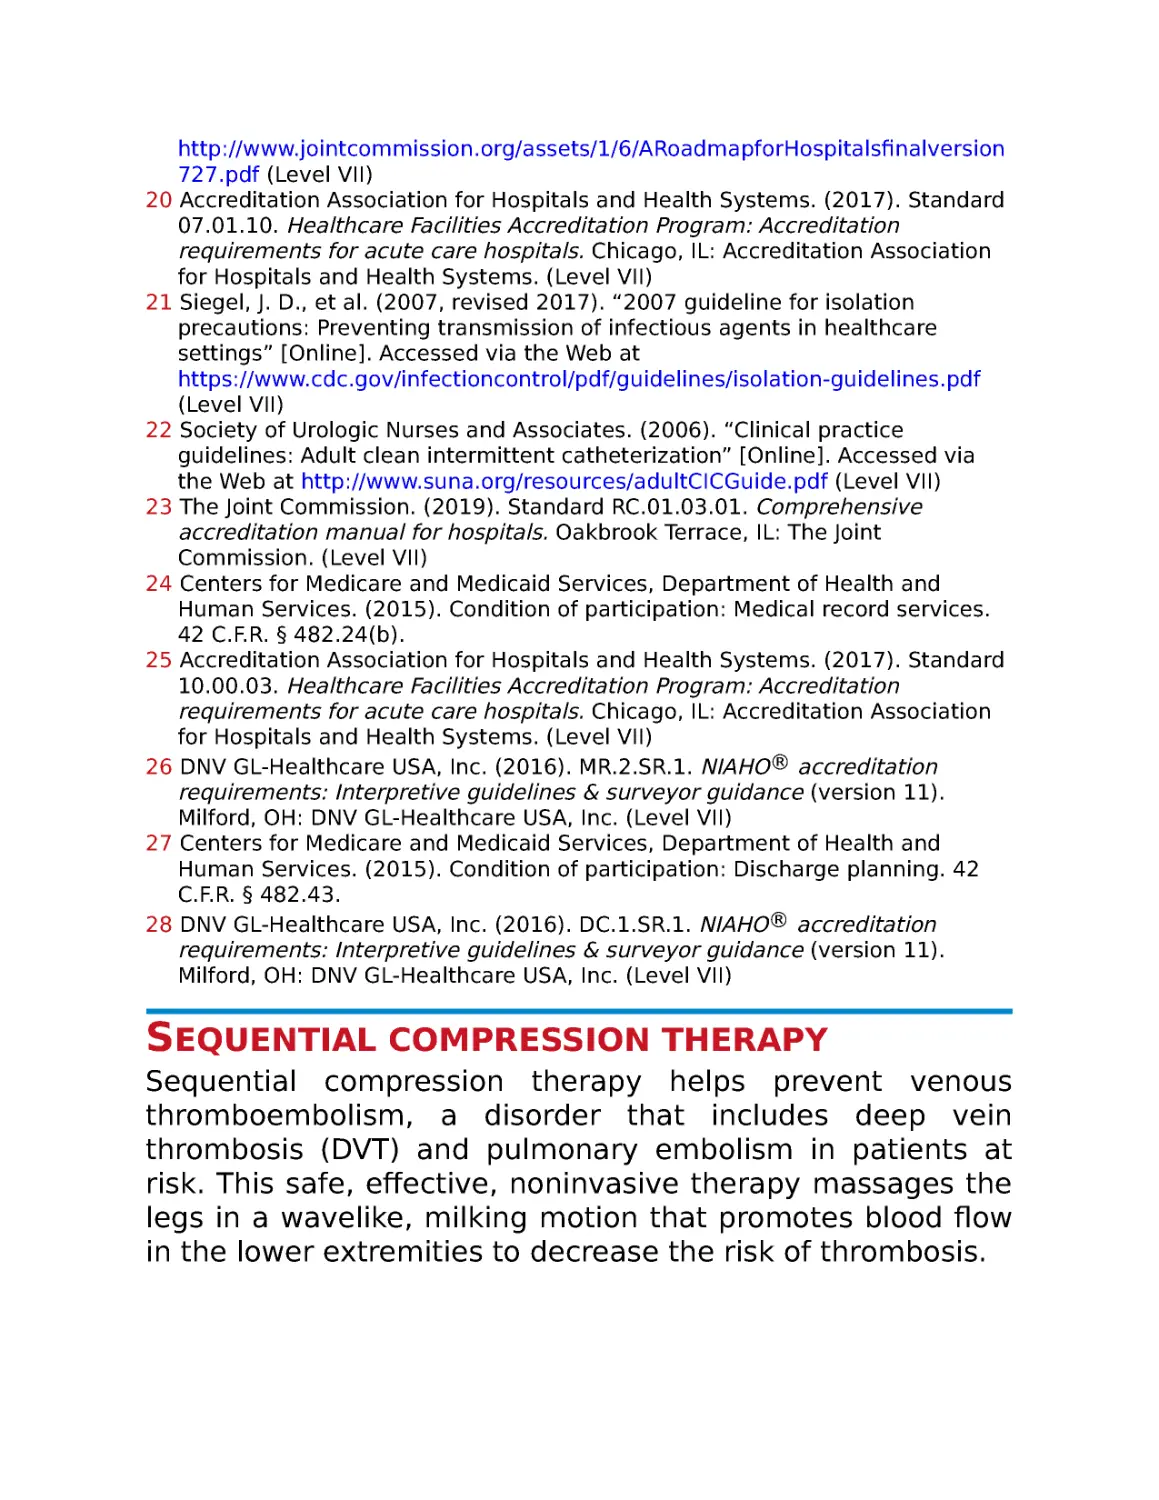 Sequential compression therapy